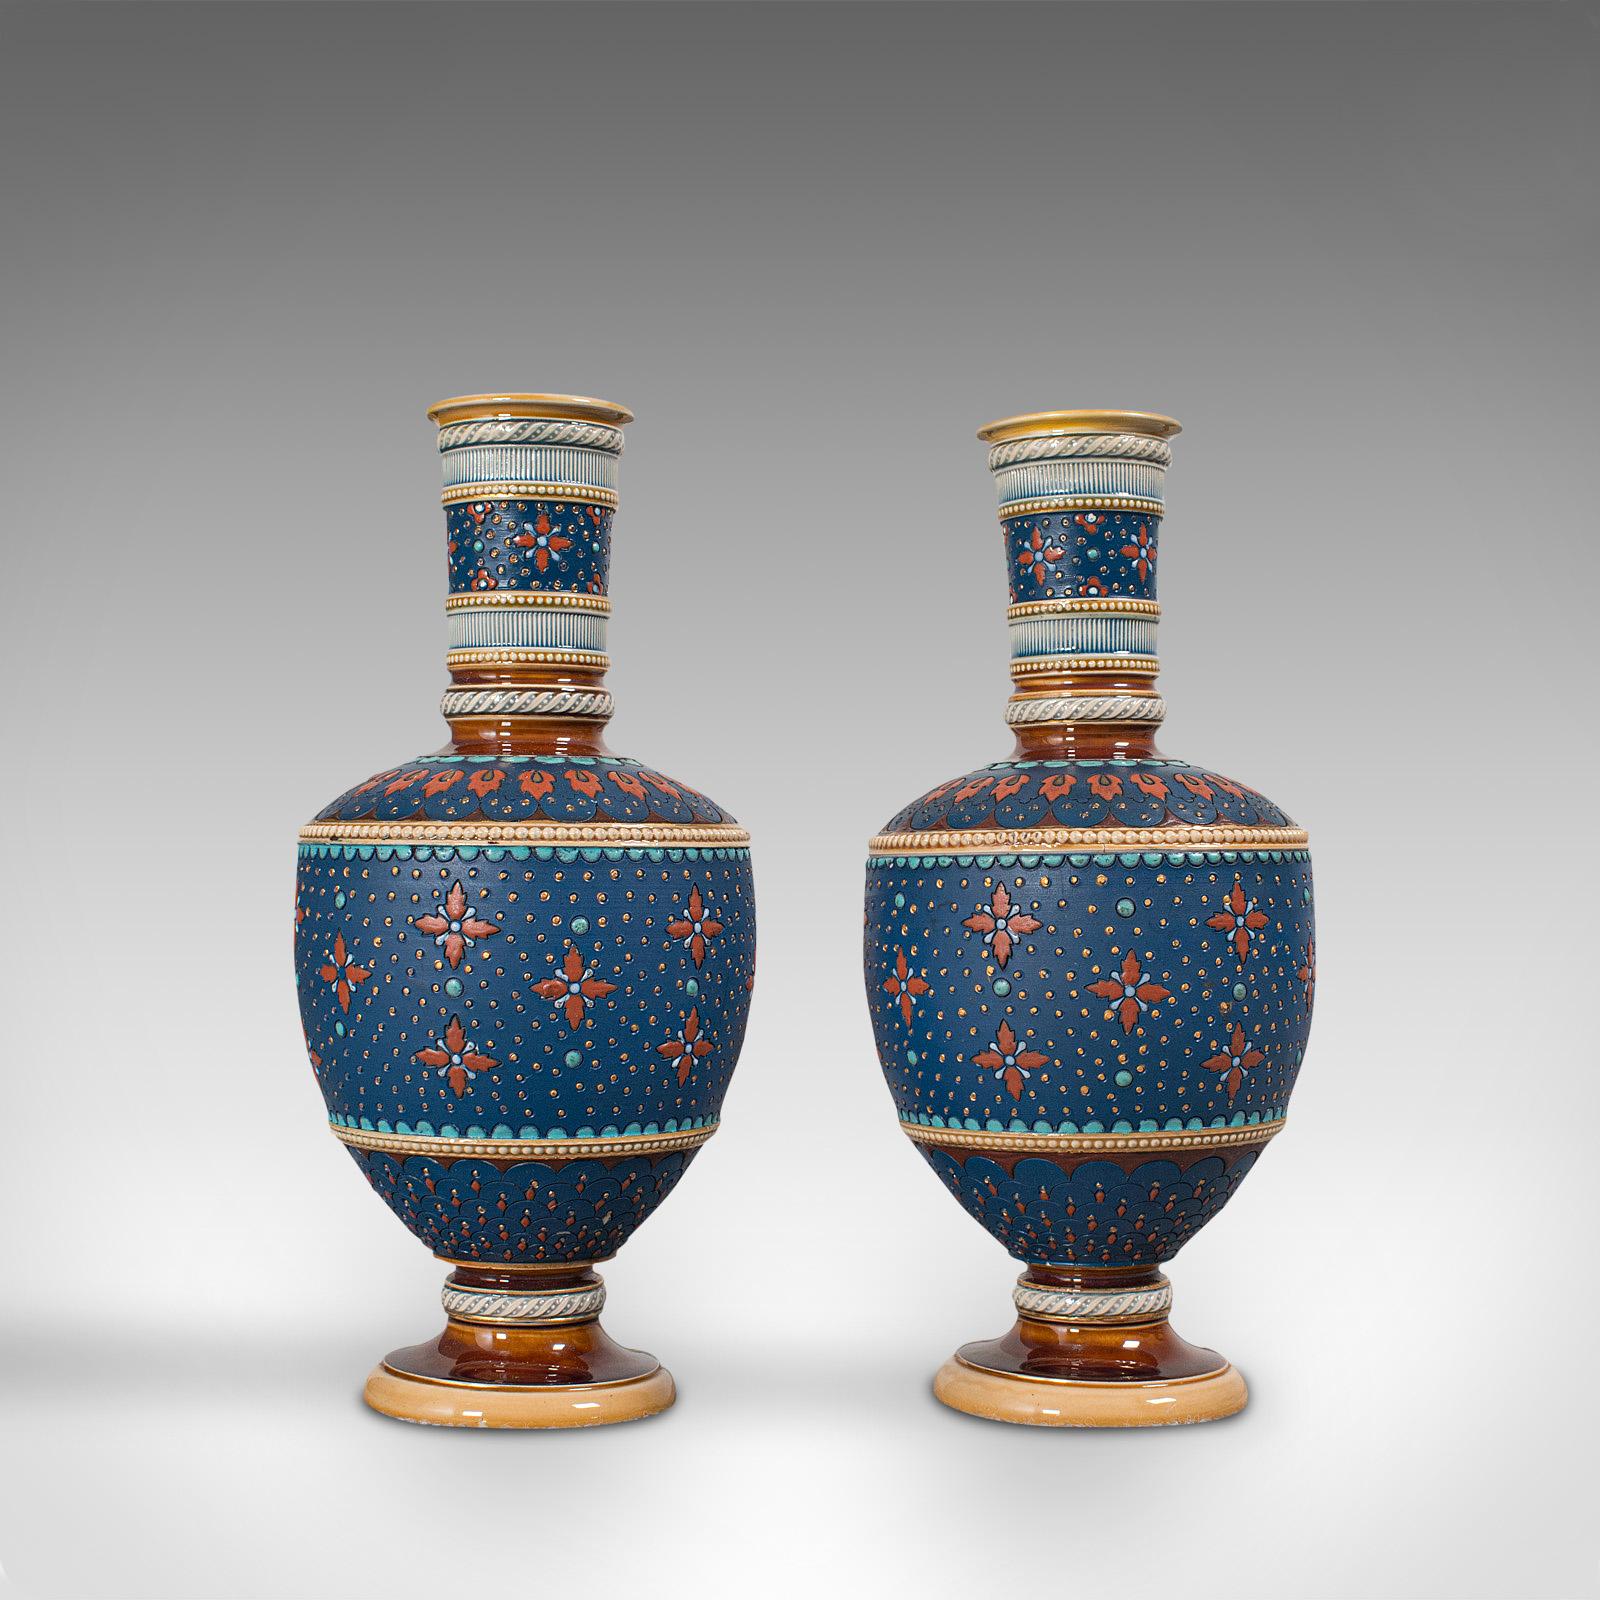 This is a pair of antique decorative vases. A German, ceramic flower vase by Villeroy & Boch of Mettlach, dating to the late Victorian period, circa 1900.

An alluring pair of decorative vases
Displaying a desirable aged patina, in very good